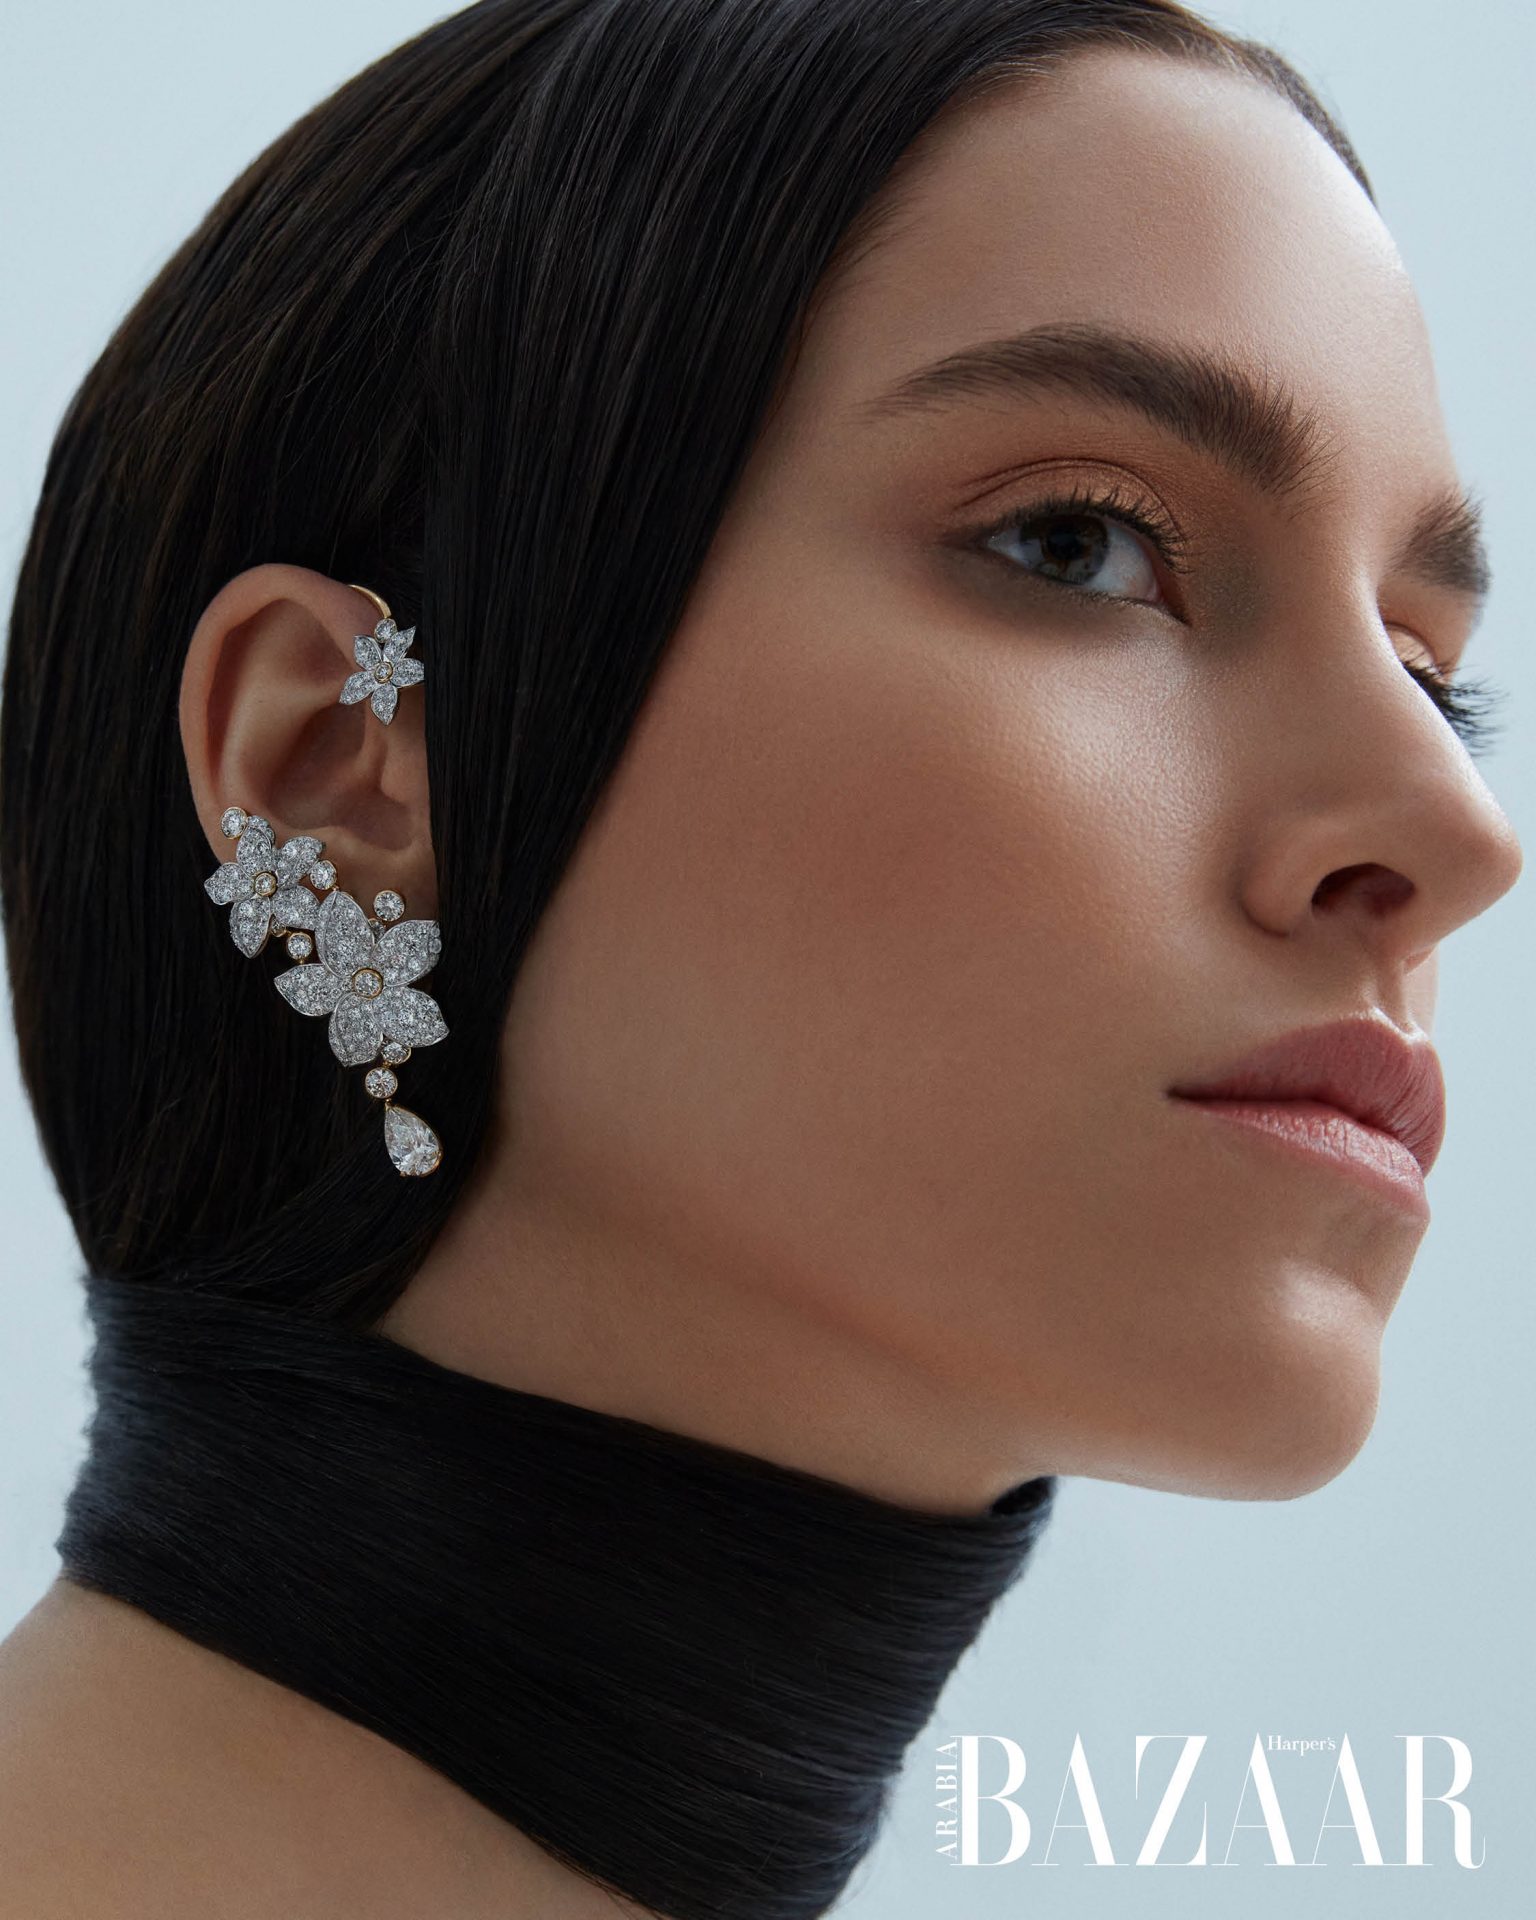 Behind The Scenes Of Chanel High Jewellery's Collection N°5 - MOJEH